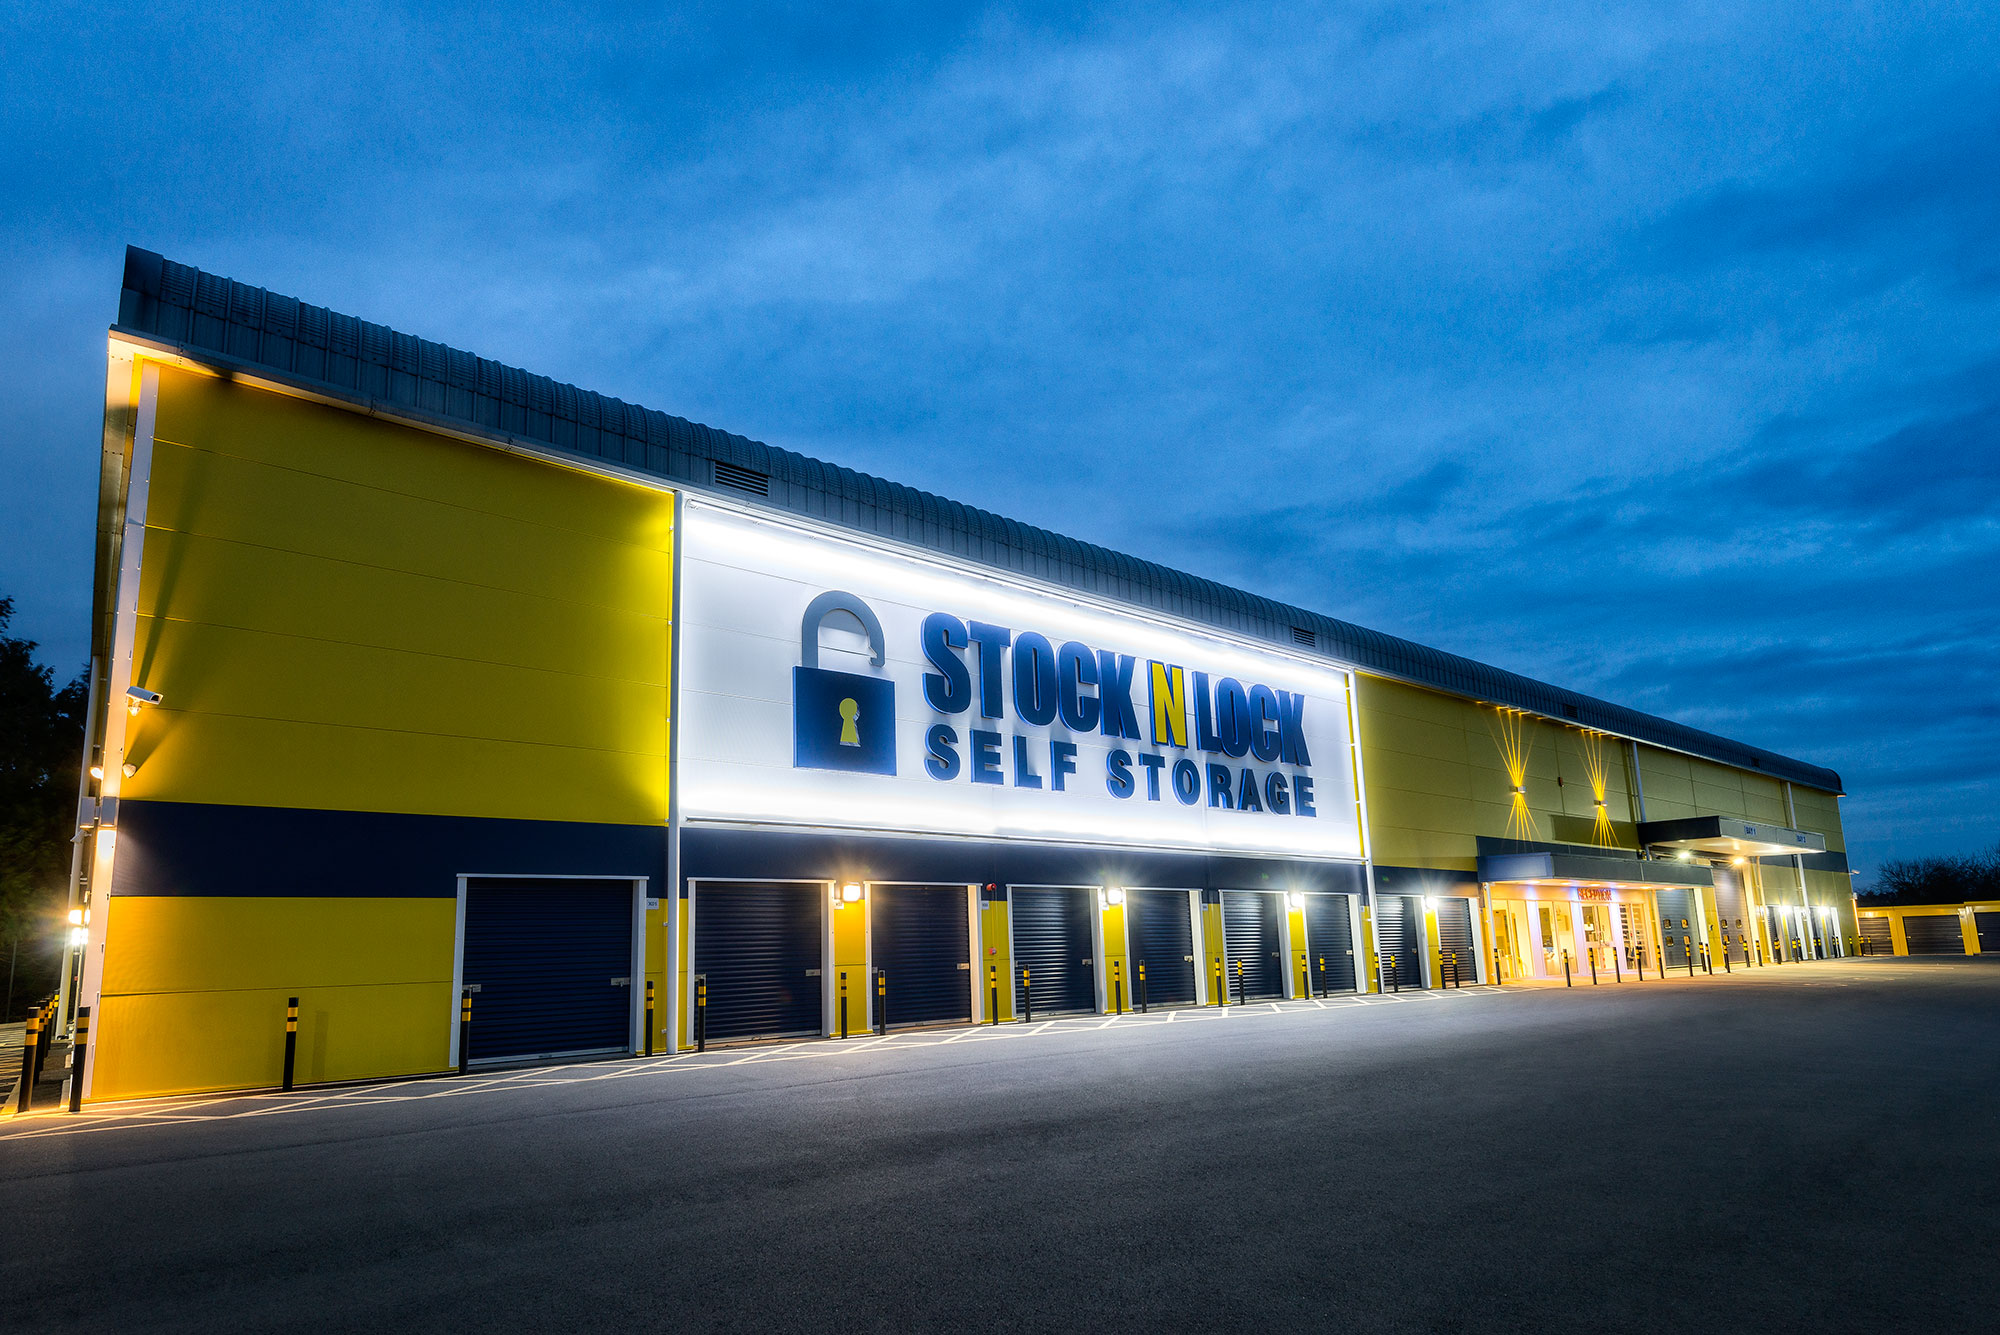 Exterior Night Shot of our Worcestor Self Storage facilty